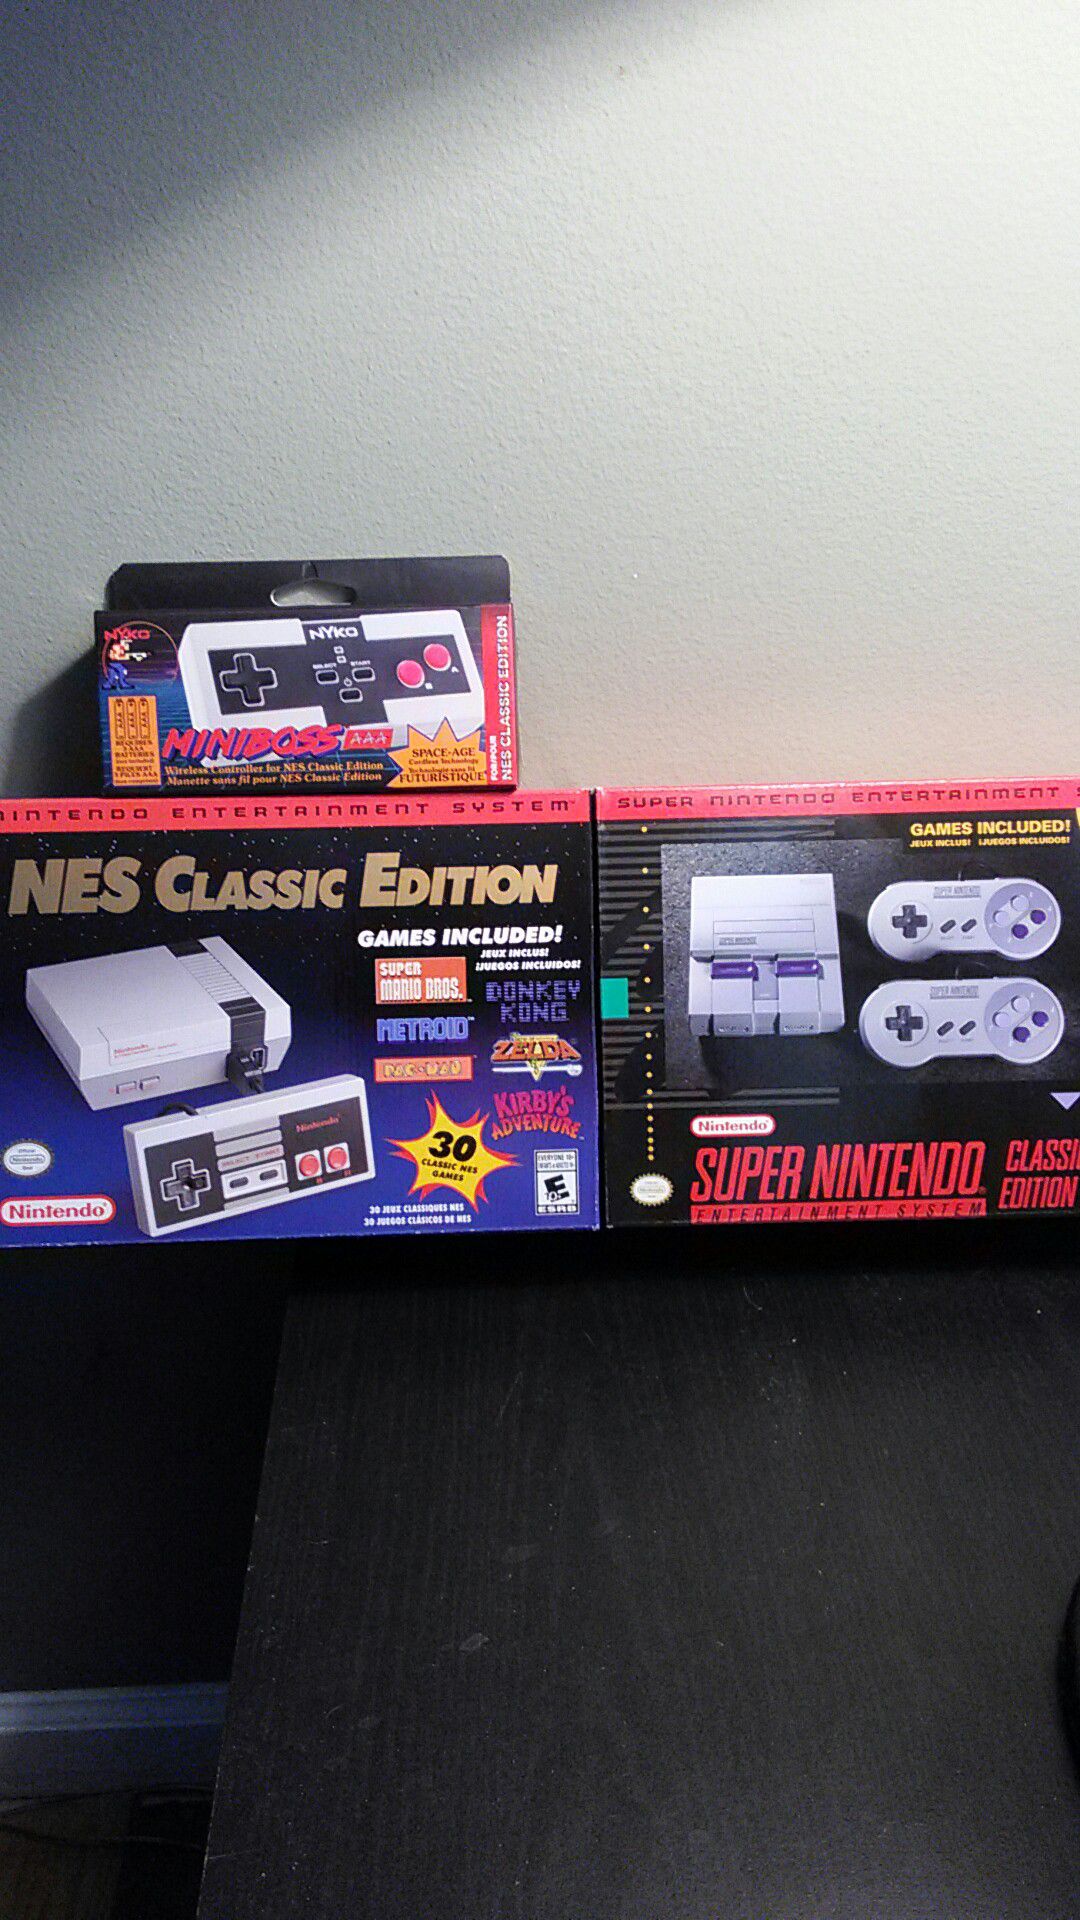 NES classic edition SNES classic edition and miniboss wireless controller for NES classic